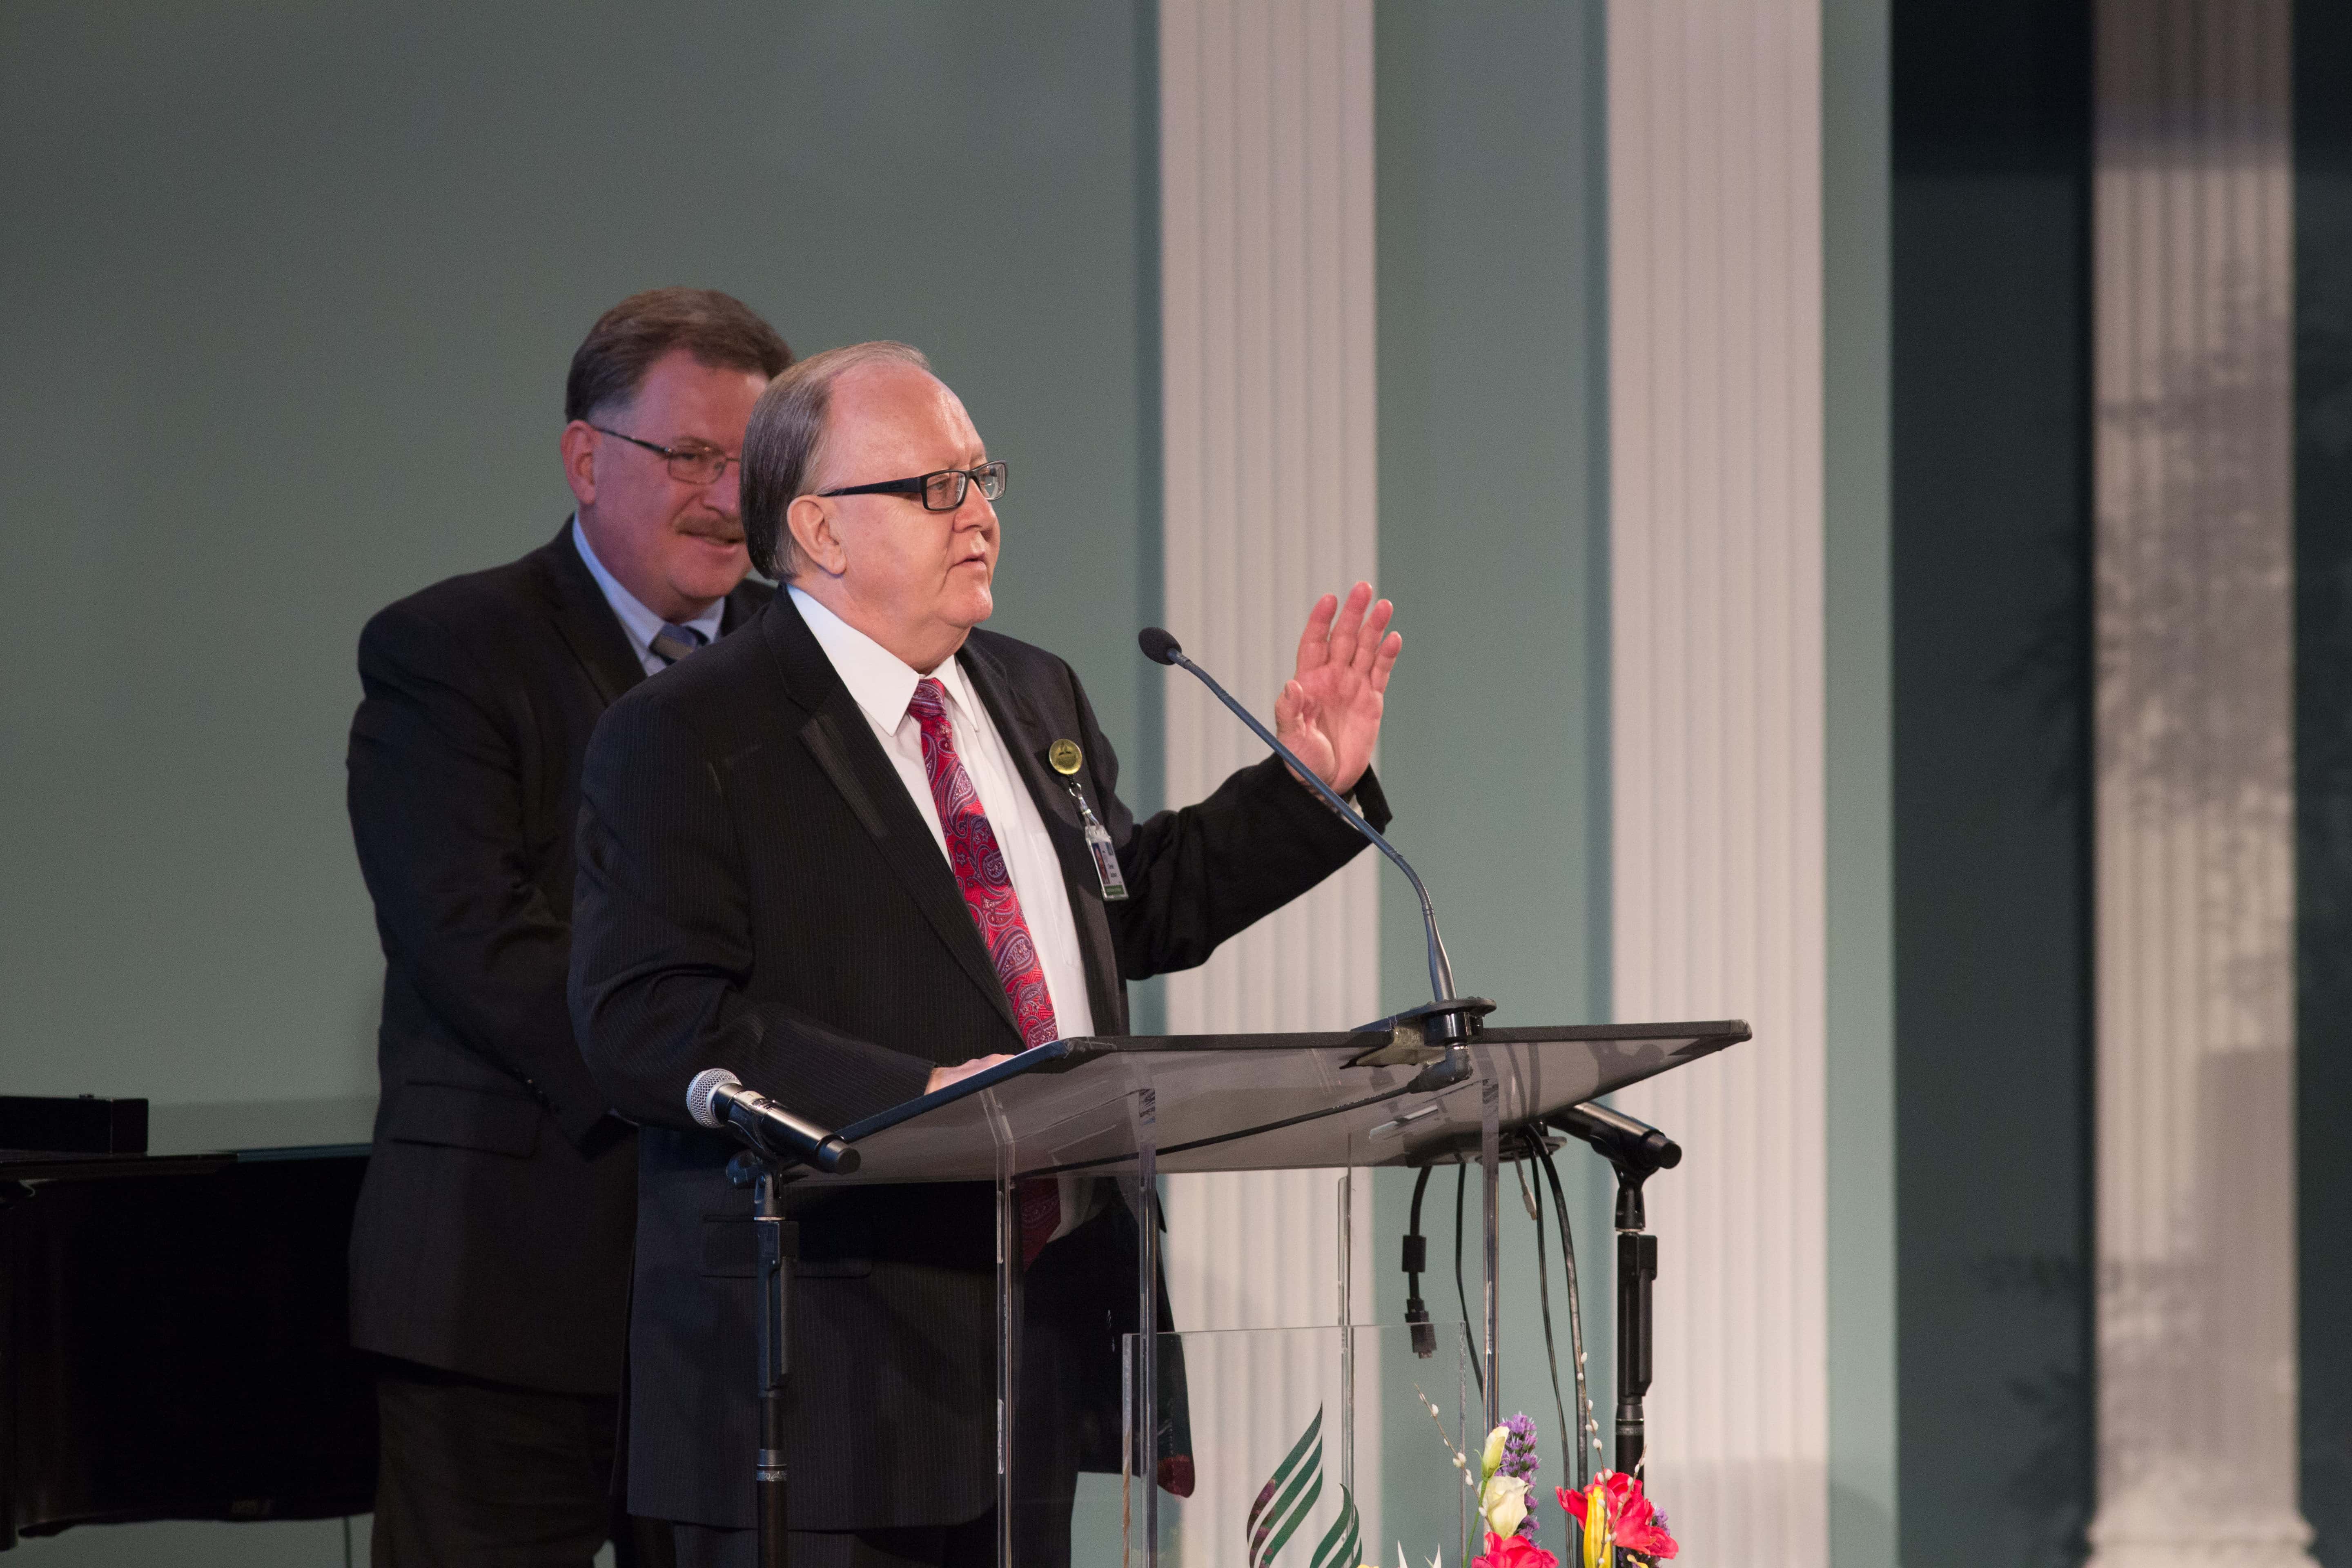 Daniel R. Jackson, president of the Seventh-day Adventist Church in North America, introduces the Partners in Mission literacy program during 2017 General Conference Spring Meeting on April 12. [Photo by Dan Weber]